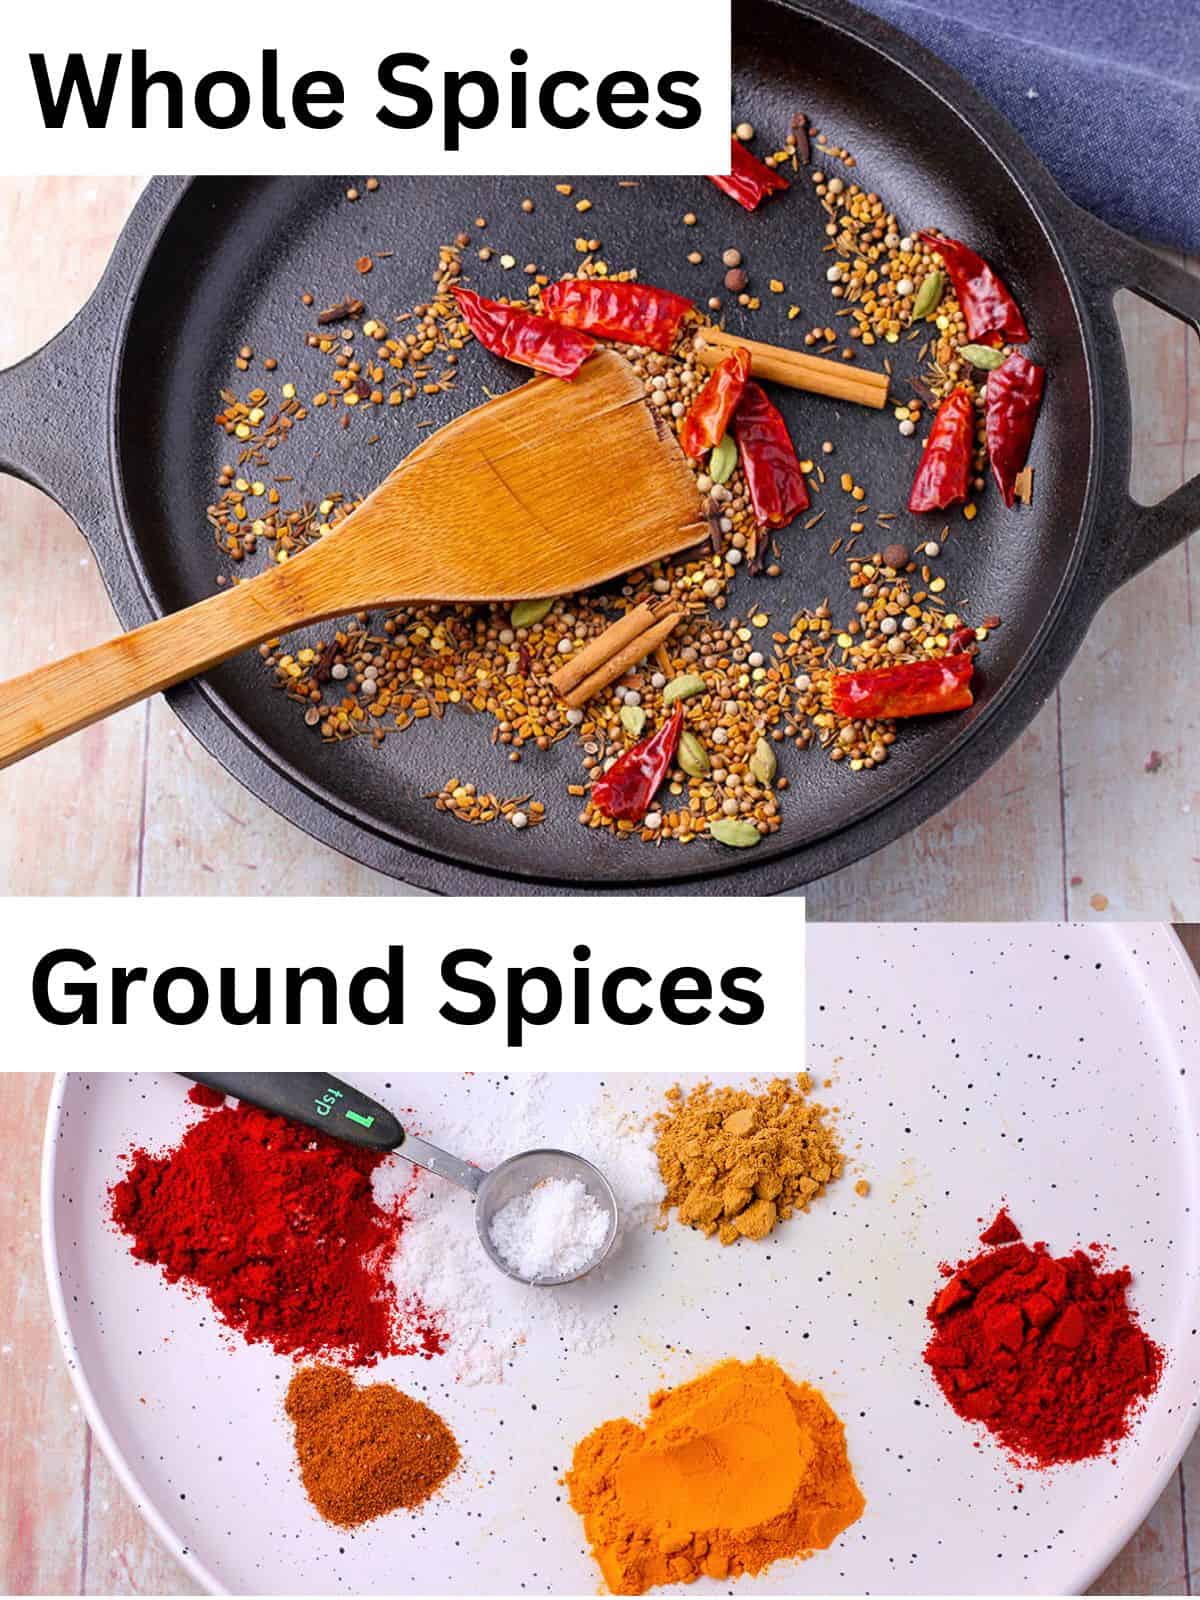 A pan of whole spices and a separate plate of ground spices.